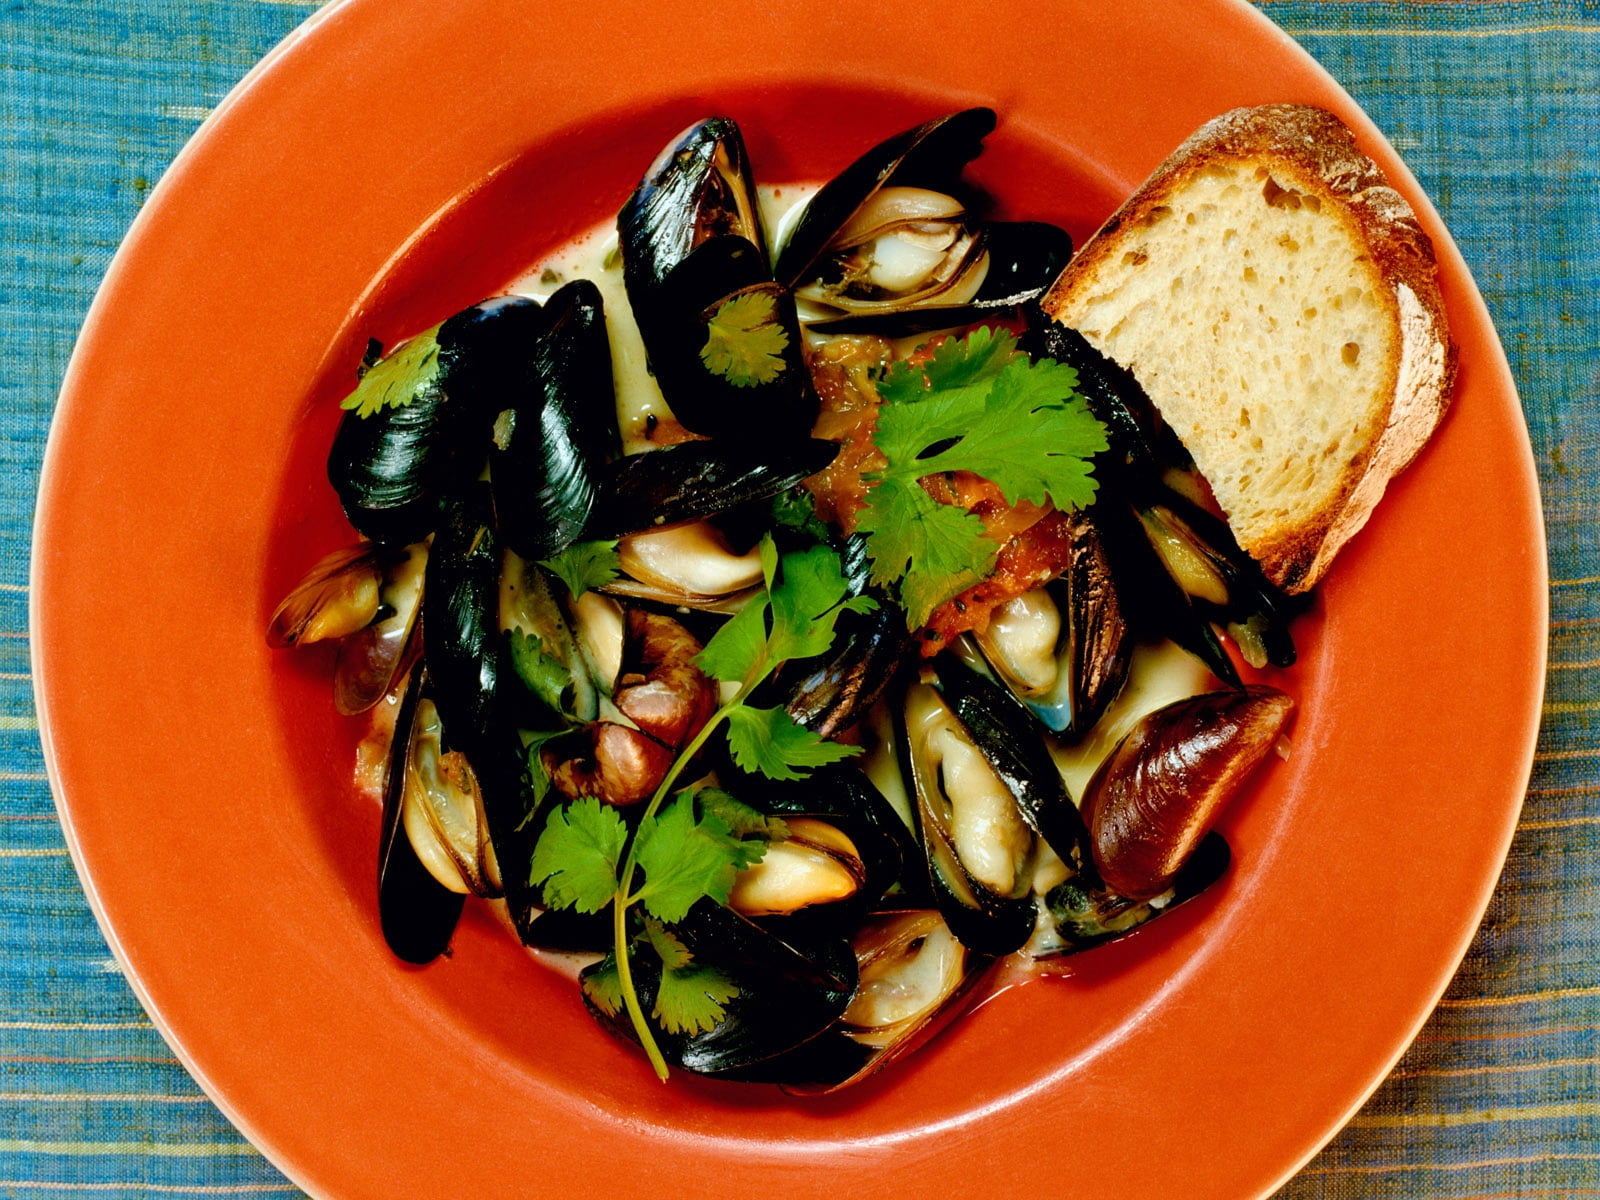 mussels dish, meat, seafood, food and drink, freshness, ready-to-eat